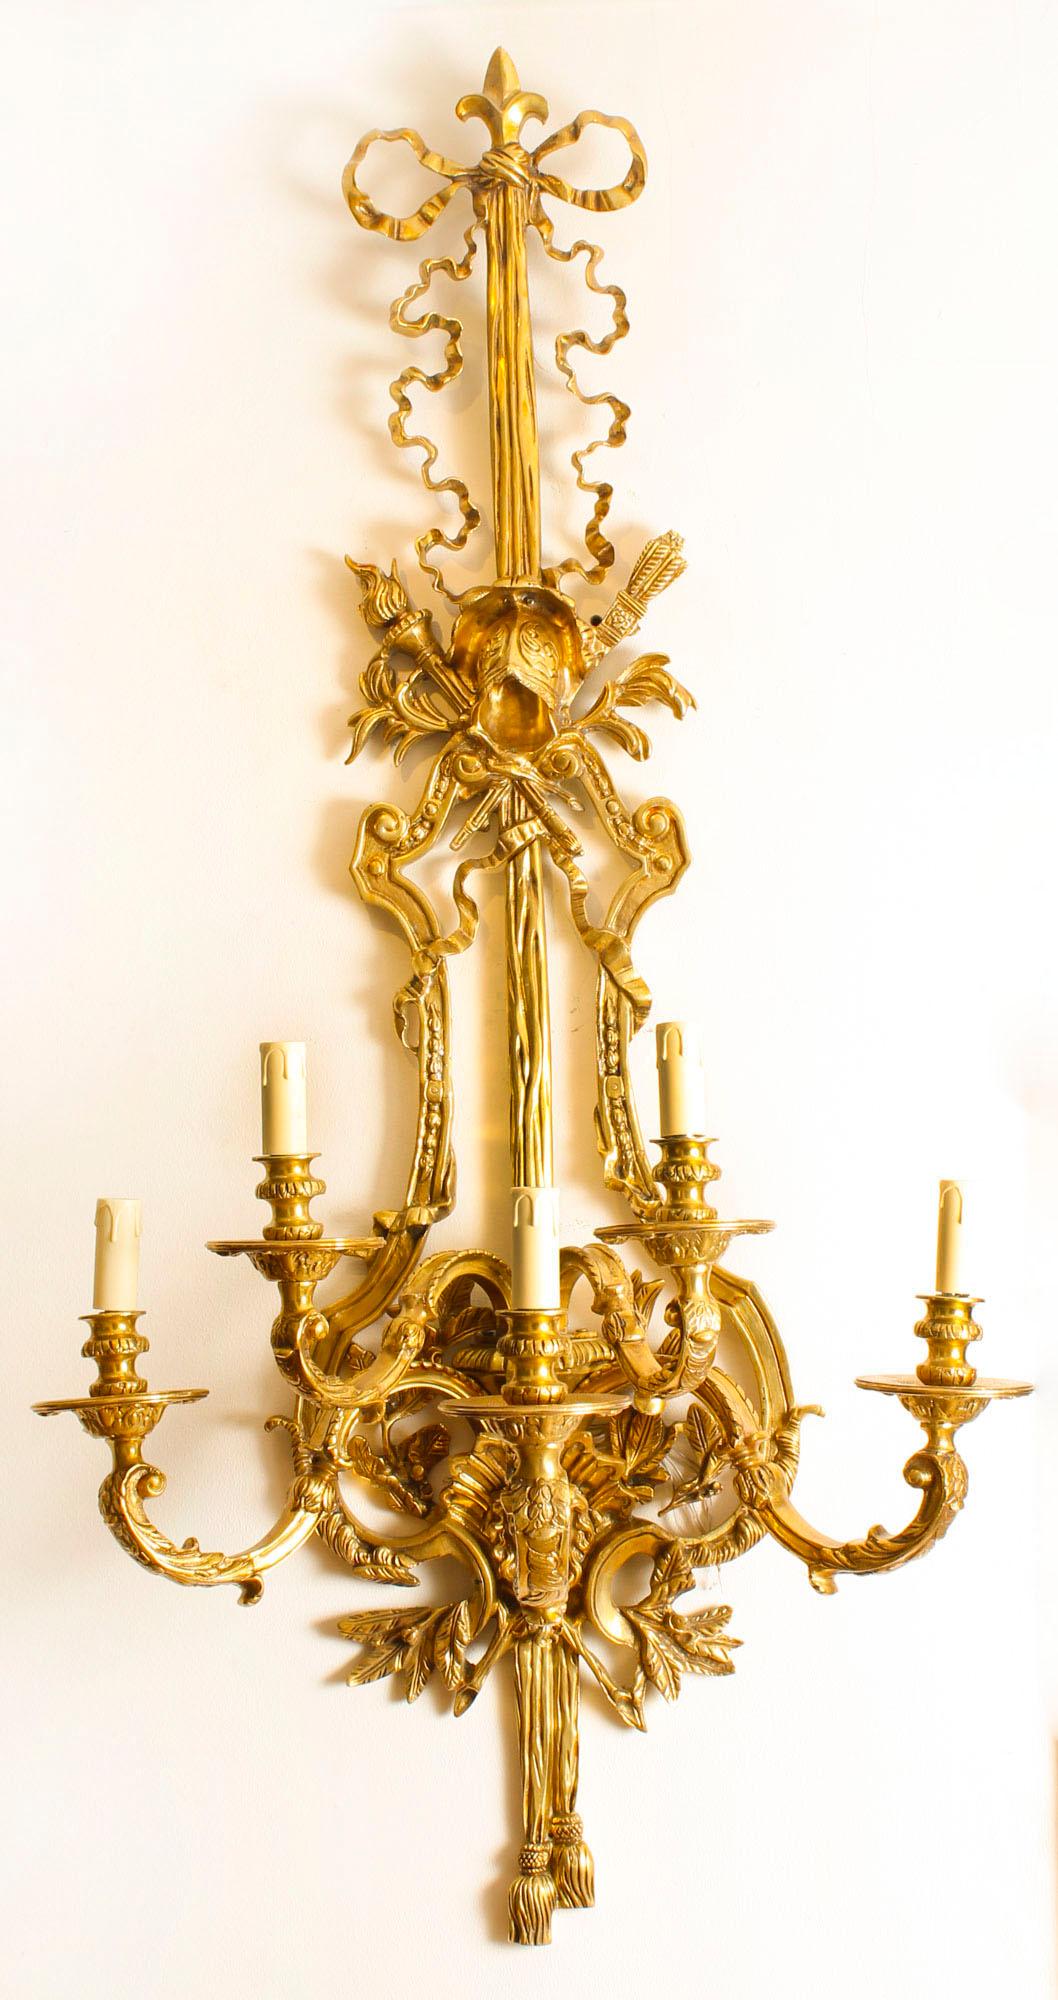 French Vintage Pair of Empire Revival Ormolu Wall Lights, 20th Century